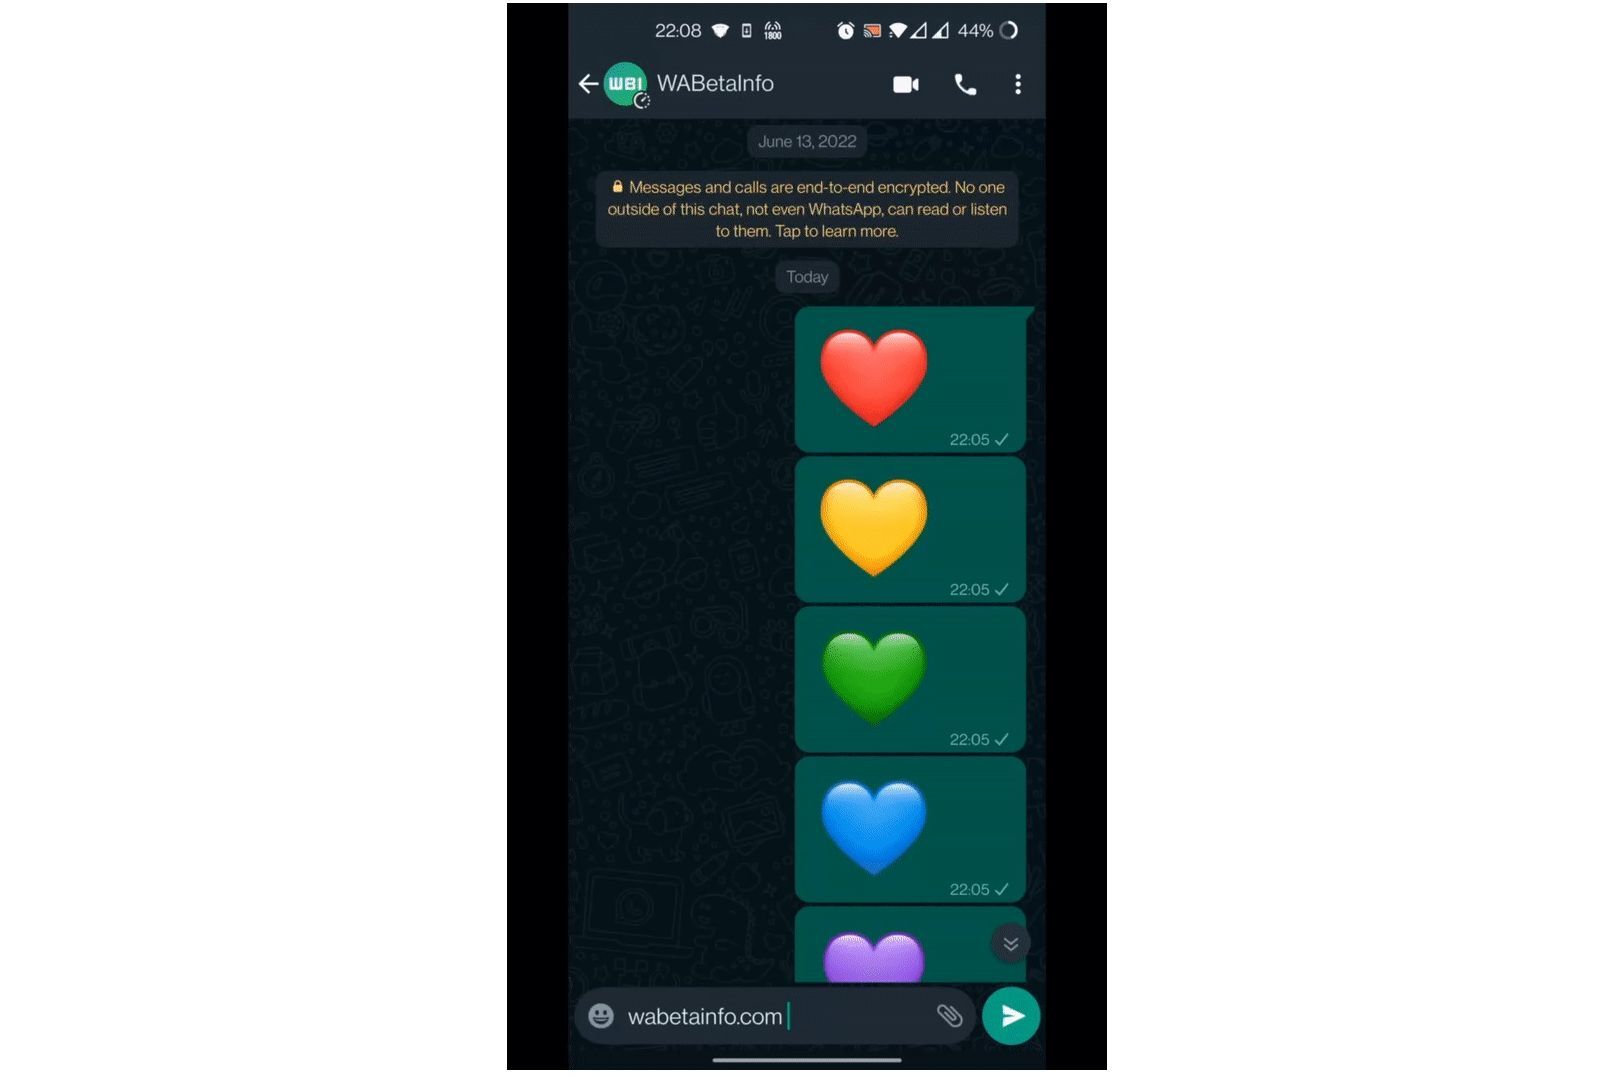 Image credit - WABetaInfo - Animated heart emojis are coming to WhatsApp for Android